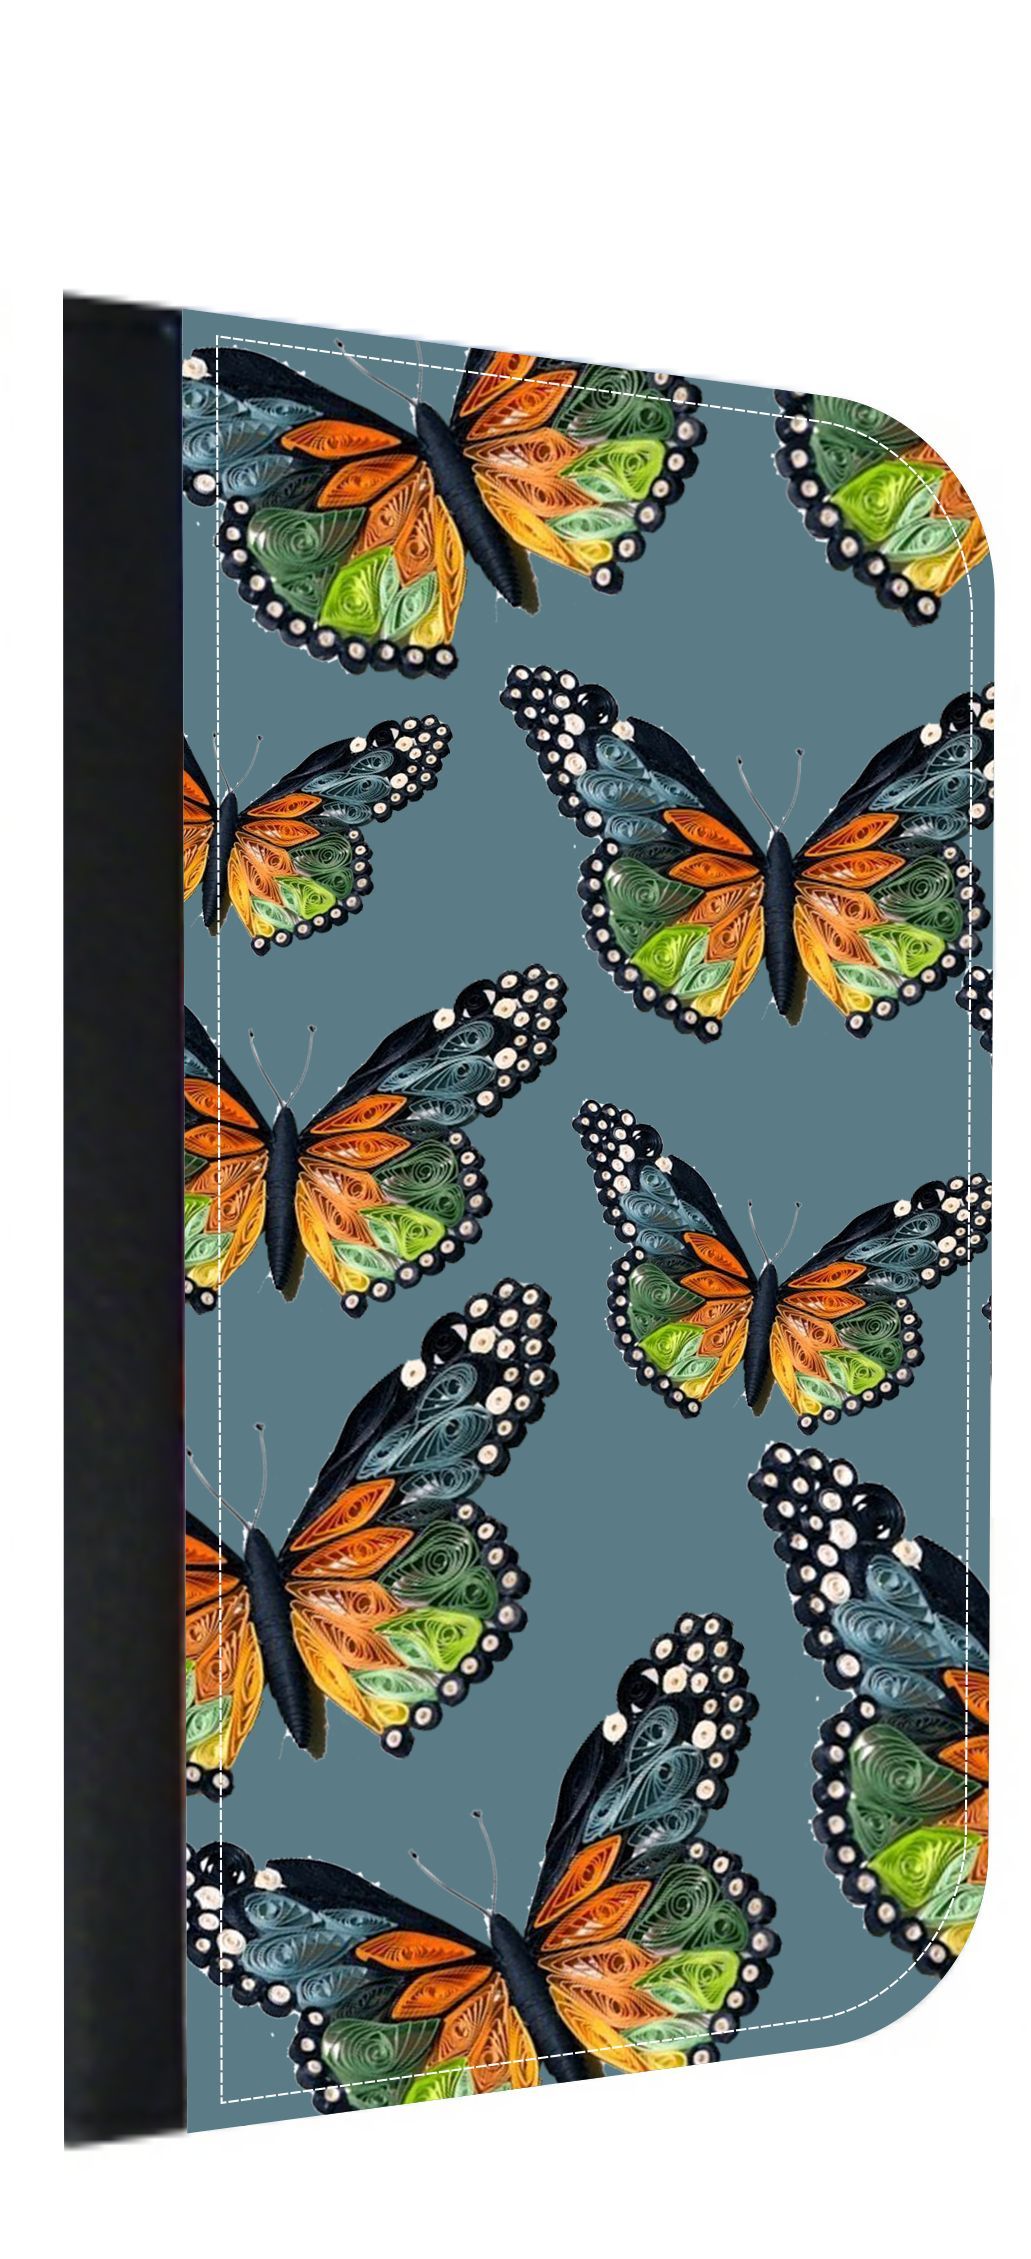 Slate Butterfly Pattern Galaxy s10p Case - Galaxy s10 Plus Case - Galaxy s10 Plus Wallet Case - s10 Plus Case Wallet - Galaxy s10 Plus Case Wallet - s10 Plus Case Flip Cover - image 1 of 3